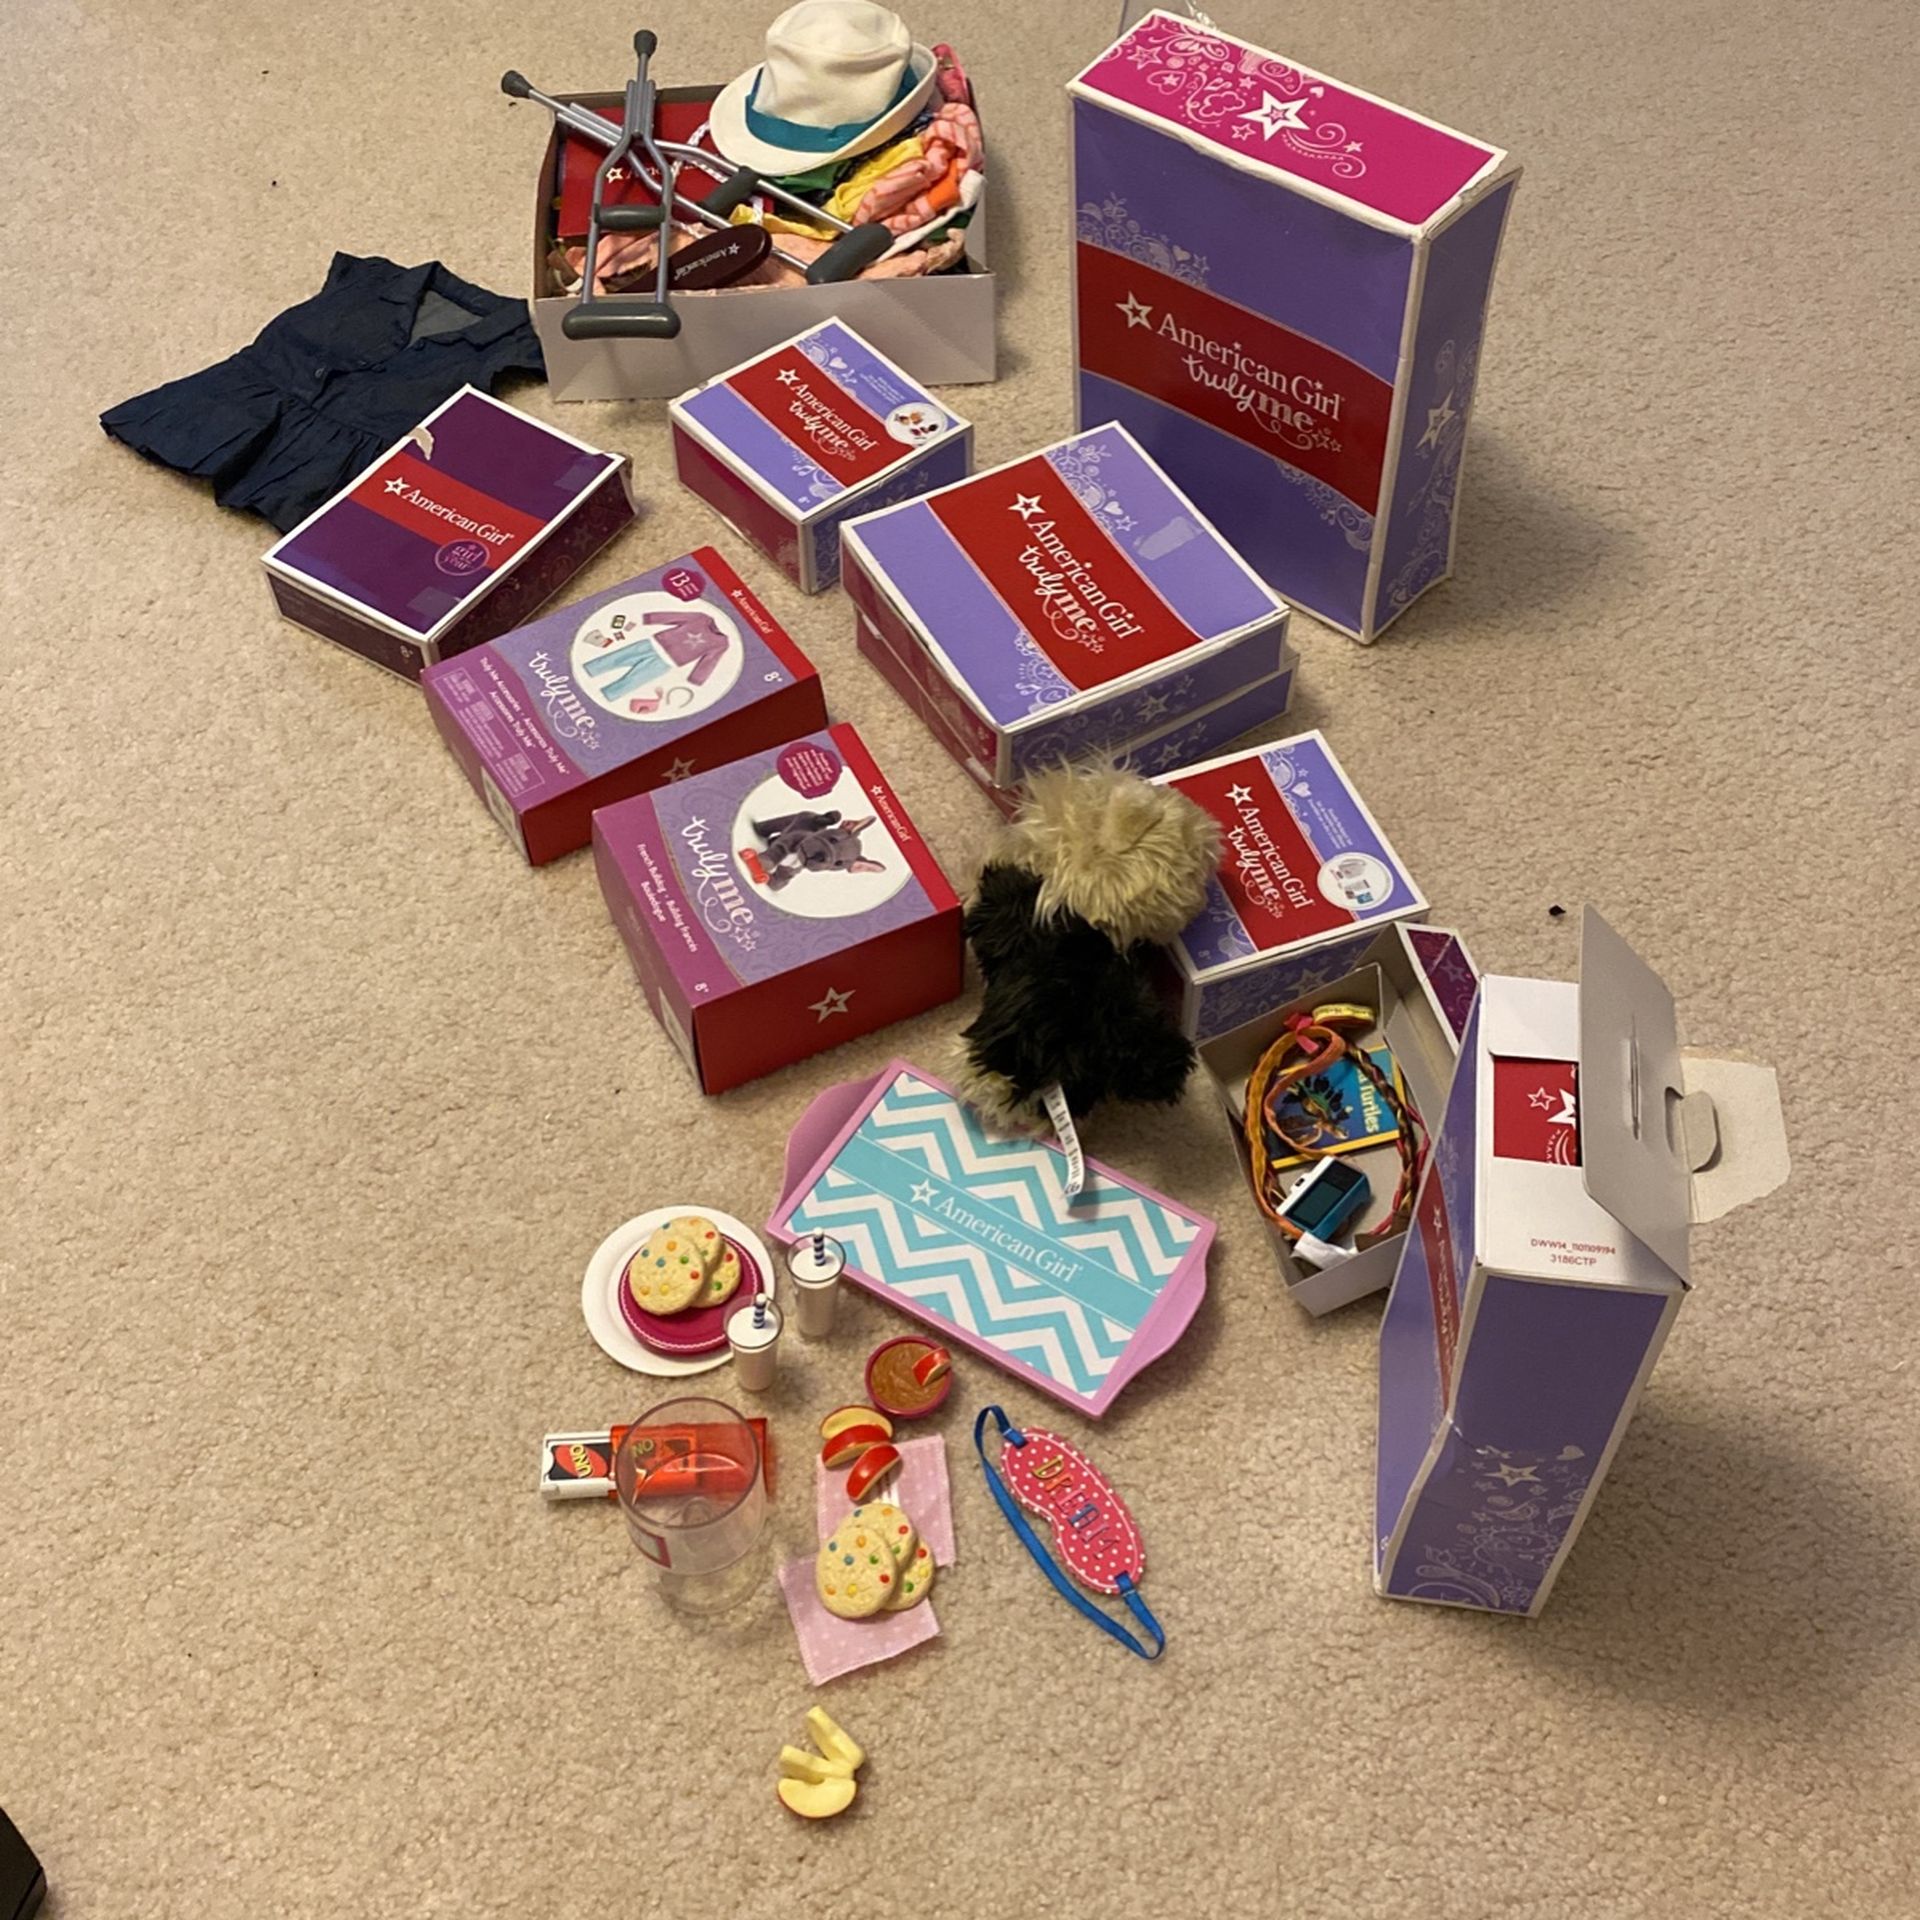 American Girl Items Most With Boxes  Selling As A Lit